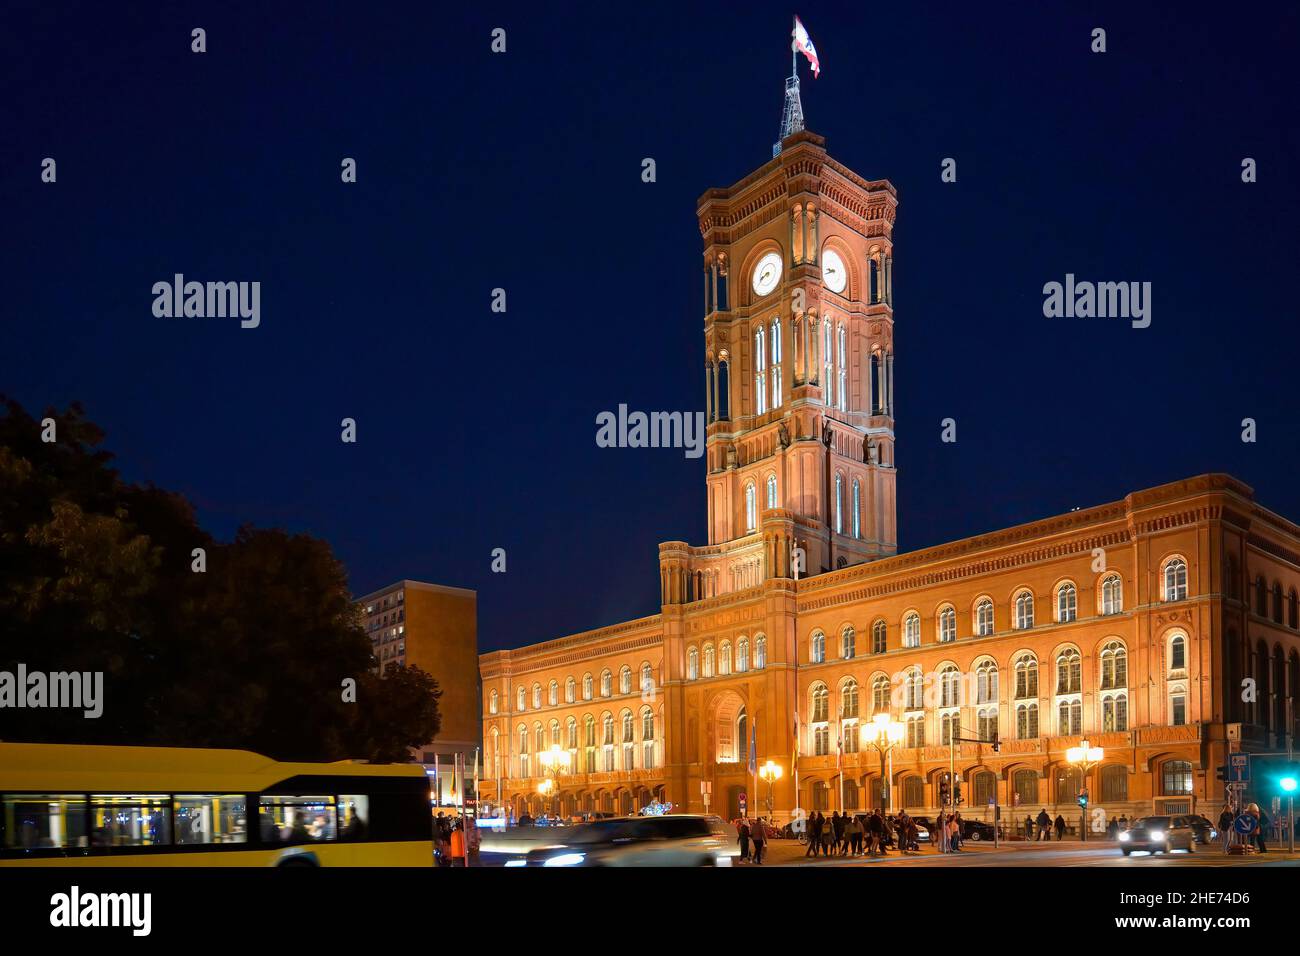 Illuminated Red Town Hall, Berlin Mitte district, Berlin, Germany Stock Photo